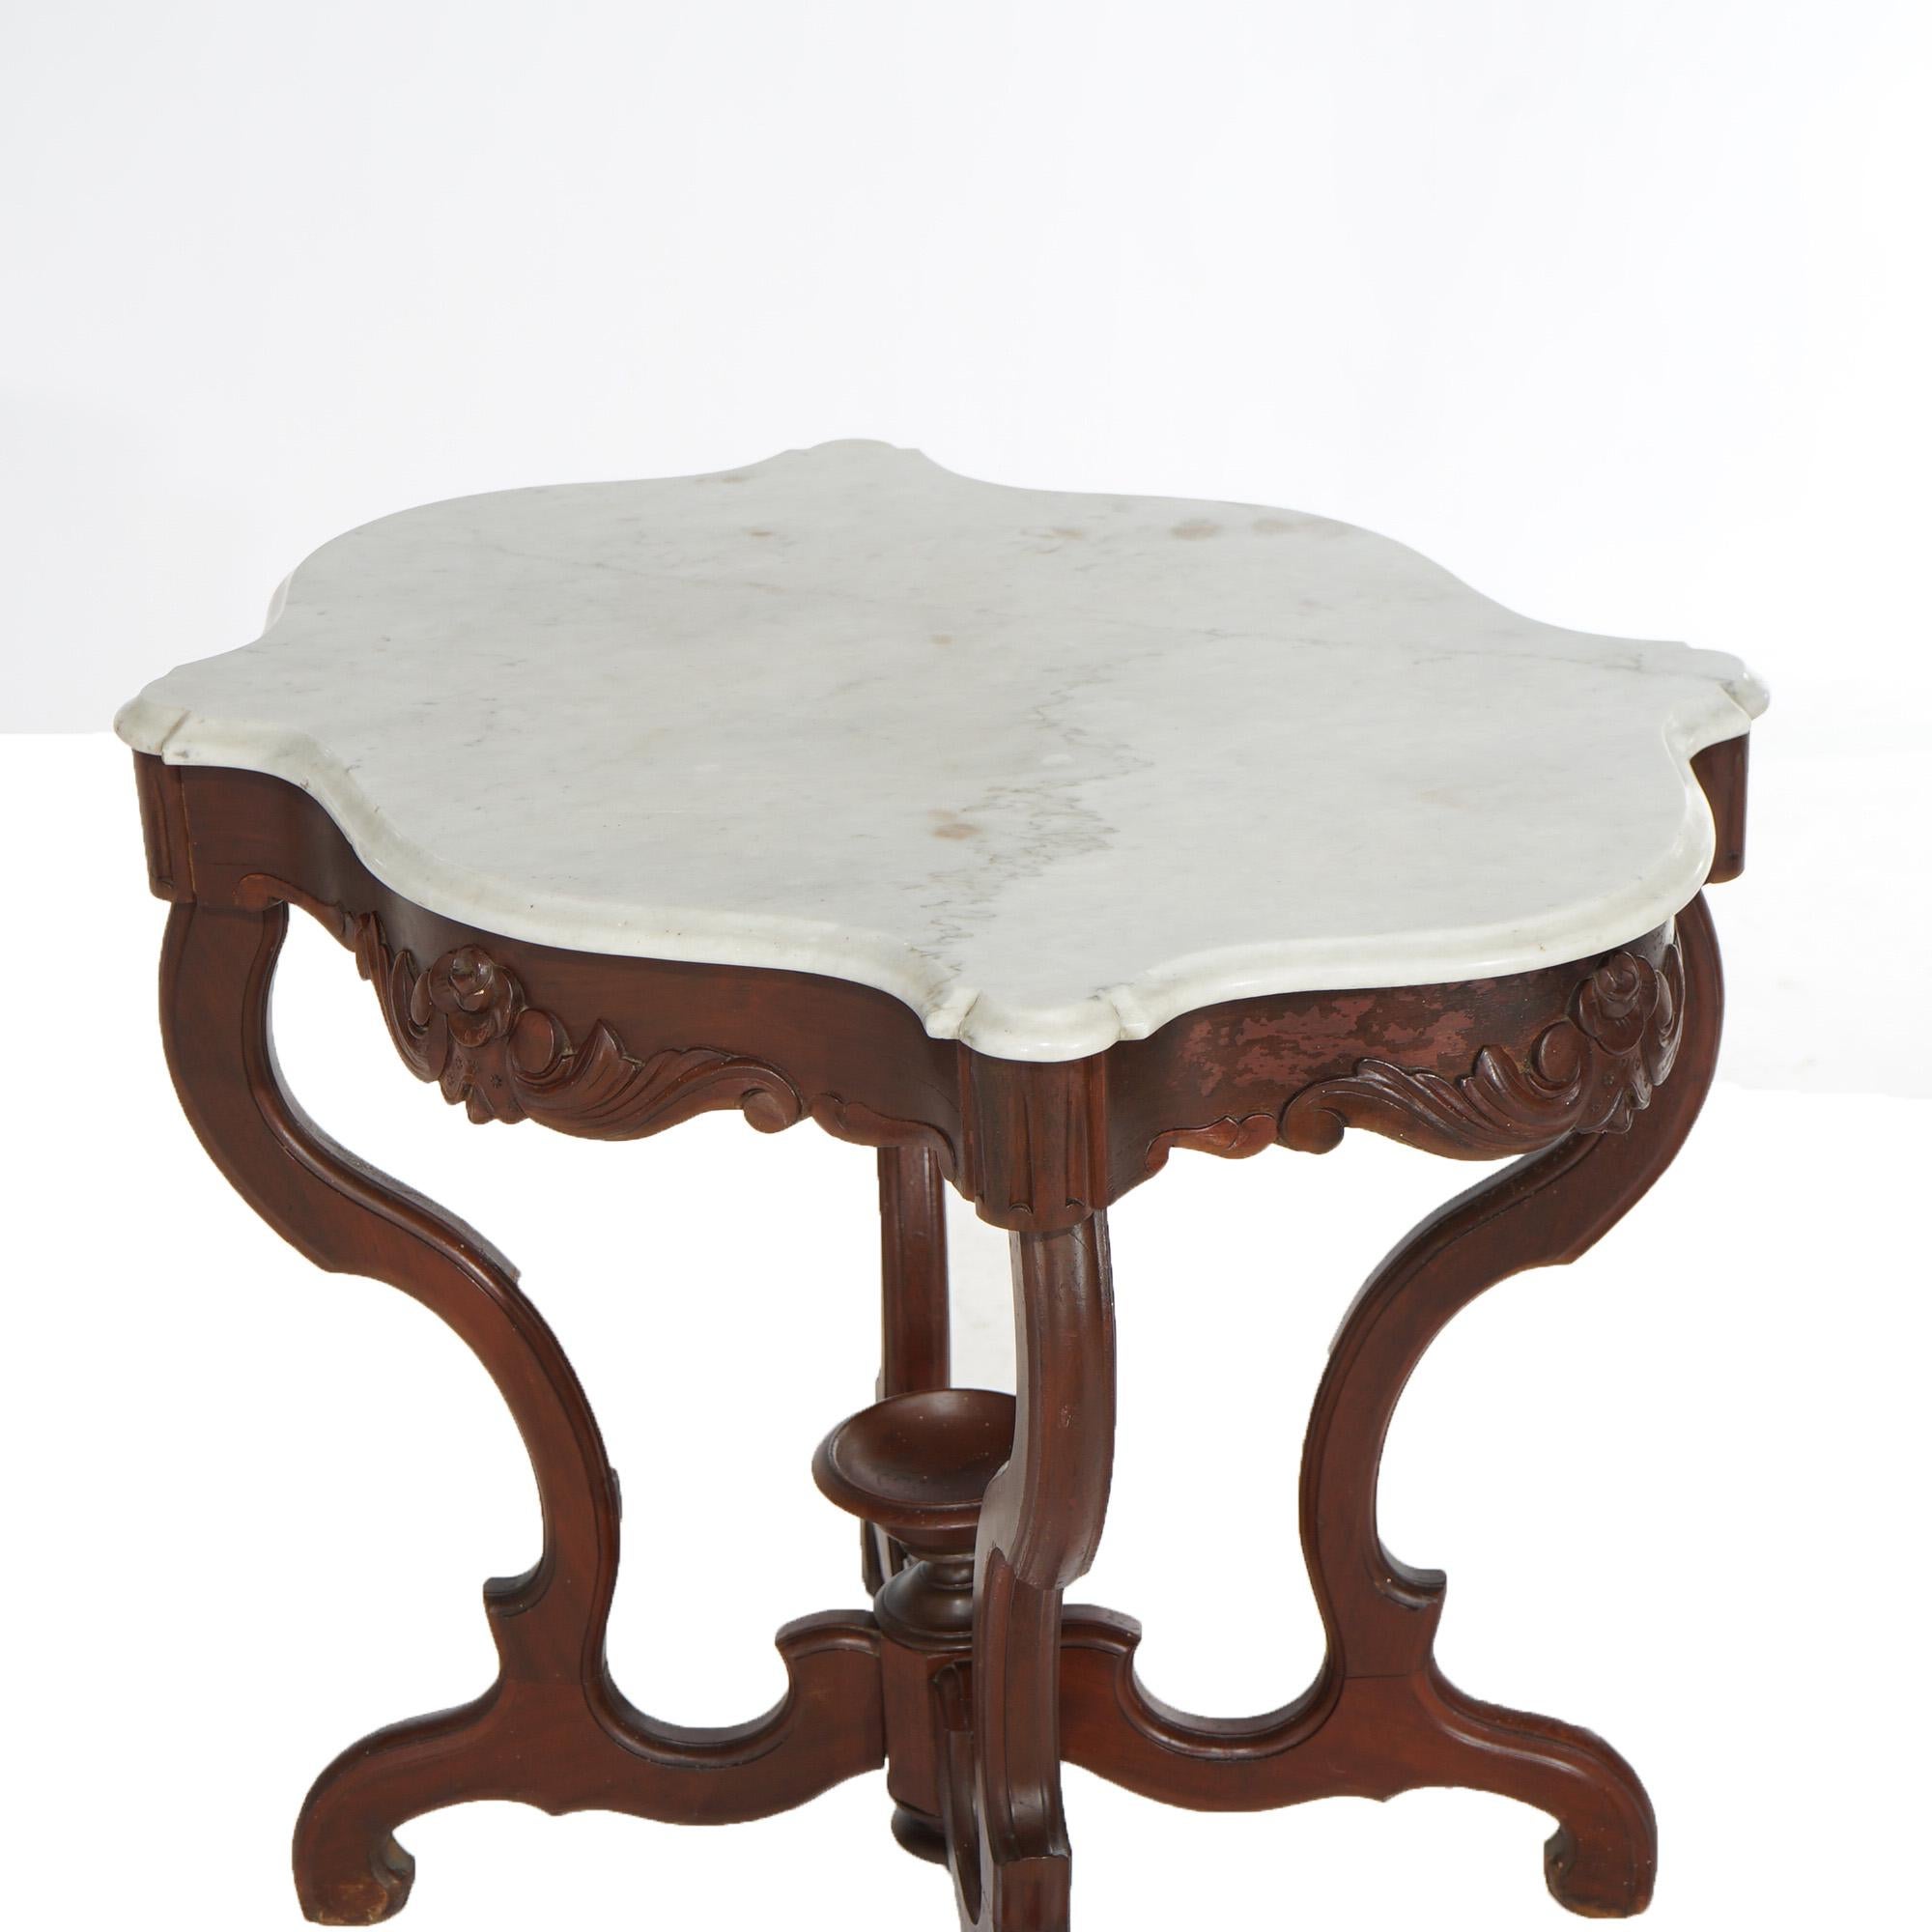 An antique Victorian parlor table offers shaped and beveled marble turtle top over walnut base having carved floral elements, central chalice form finial and scroll form legs, c1890

Measures- 28.5''H x 33.75''W x 25''D